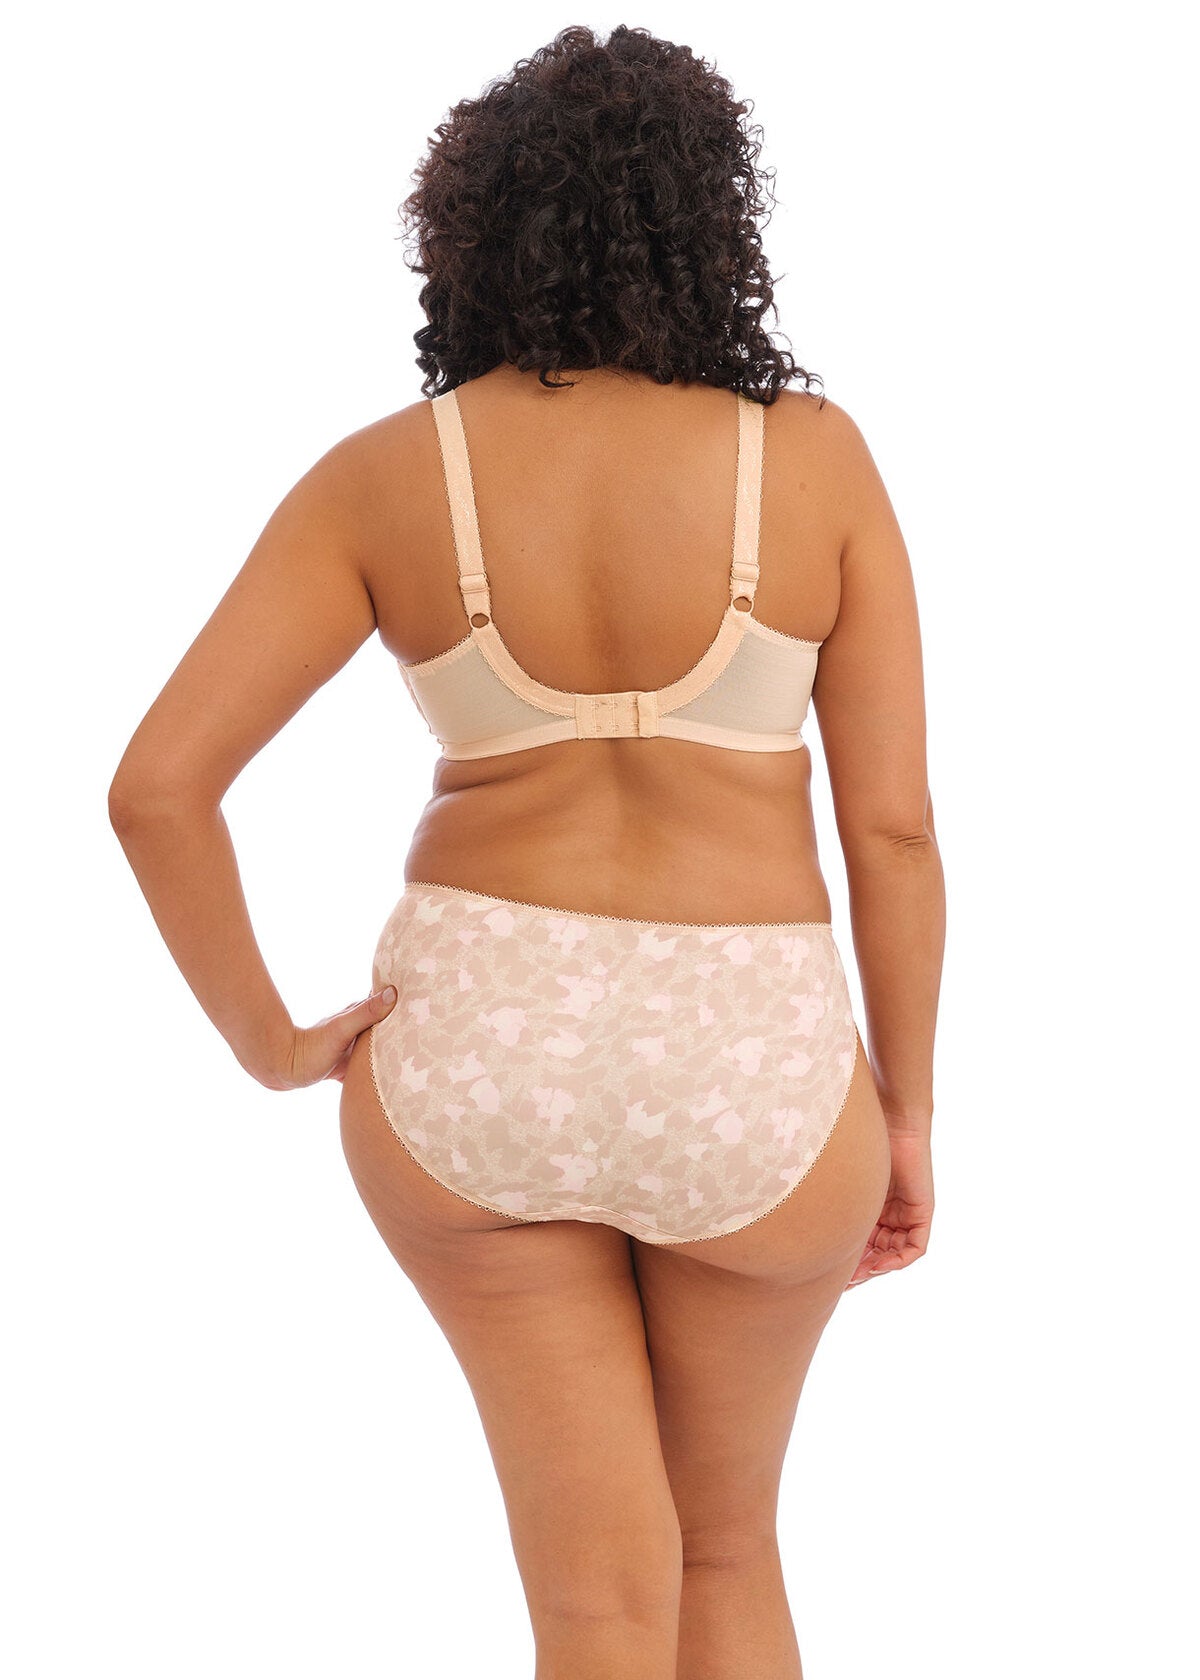 Morgan Stretch Banded Bra - Toasted Almond, worn by model back view